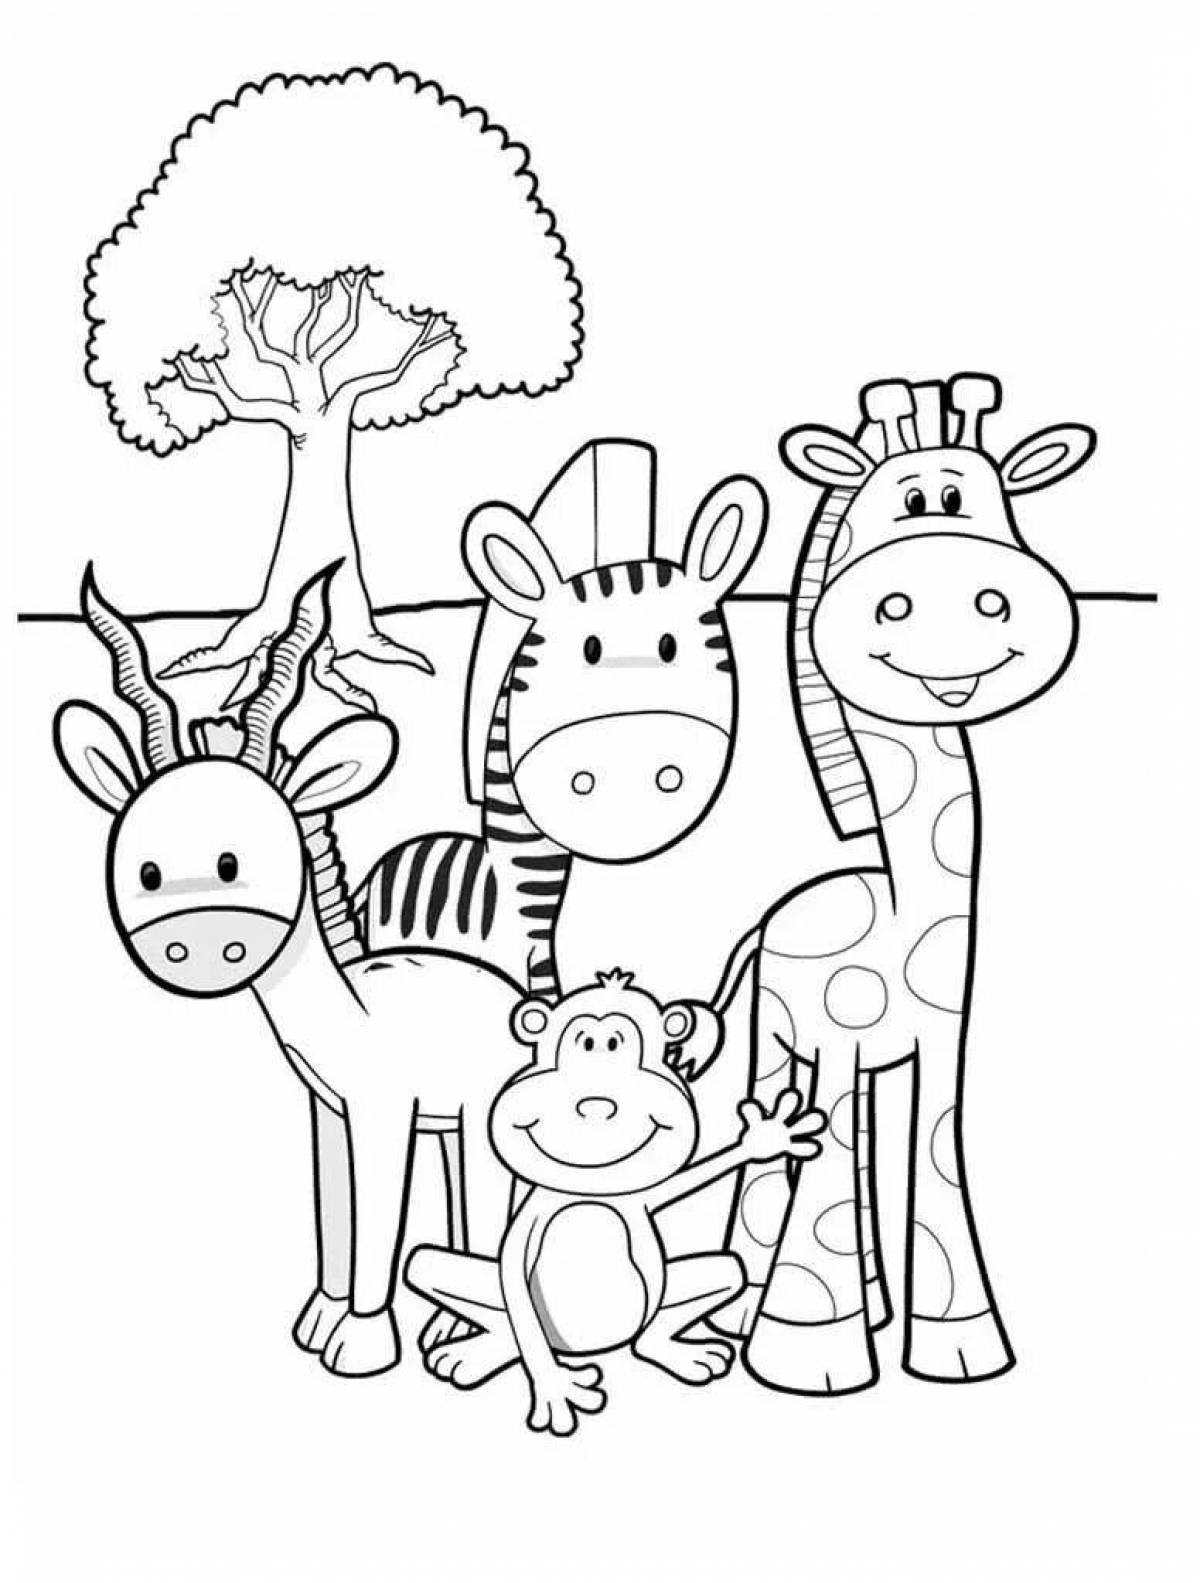 Cute African animals coloring book for kids